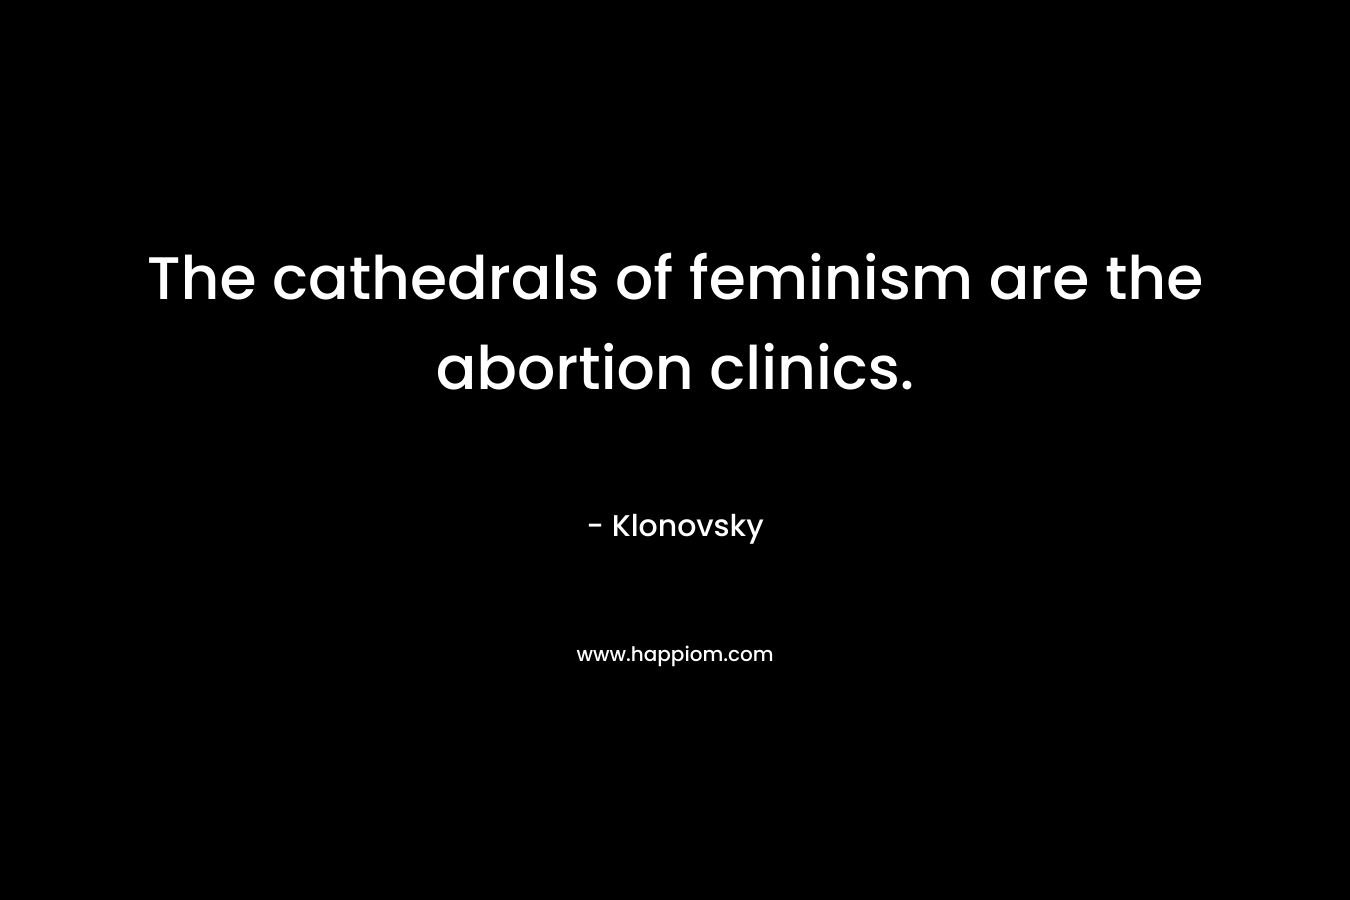 The cathedrals of feminism are the abortion clinics.